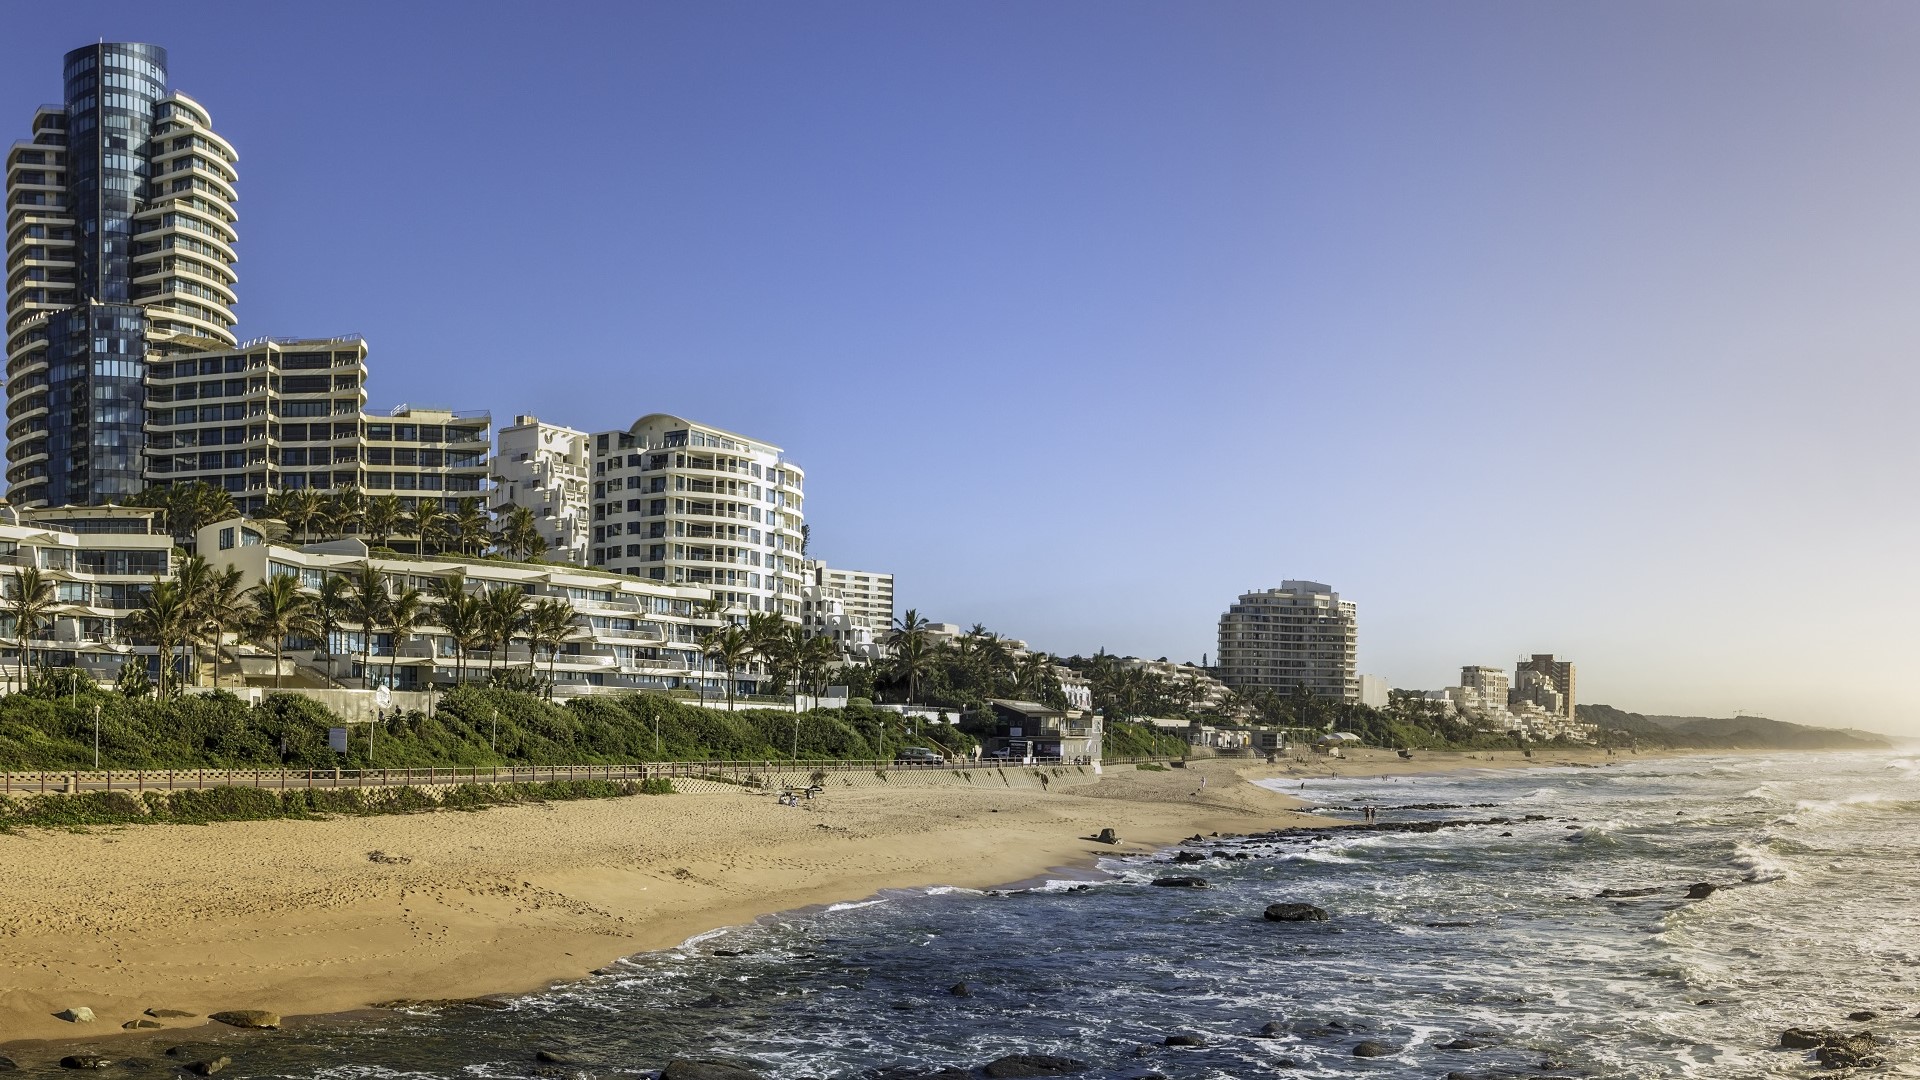 waves on the Indian Ocean shore with high-rises in Durban, South Africa